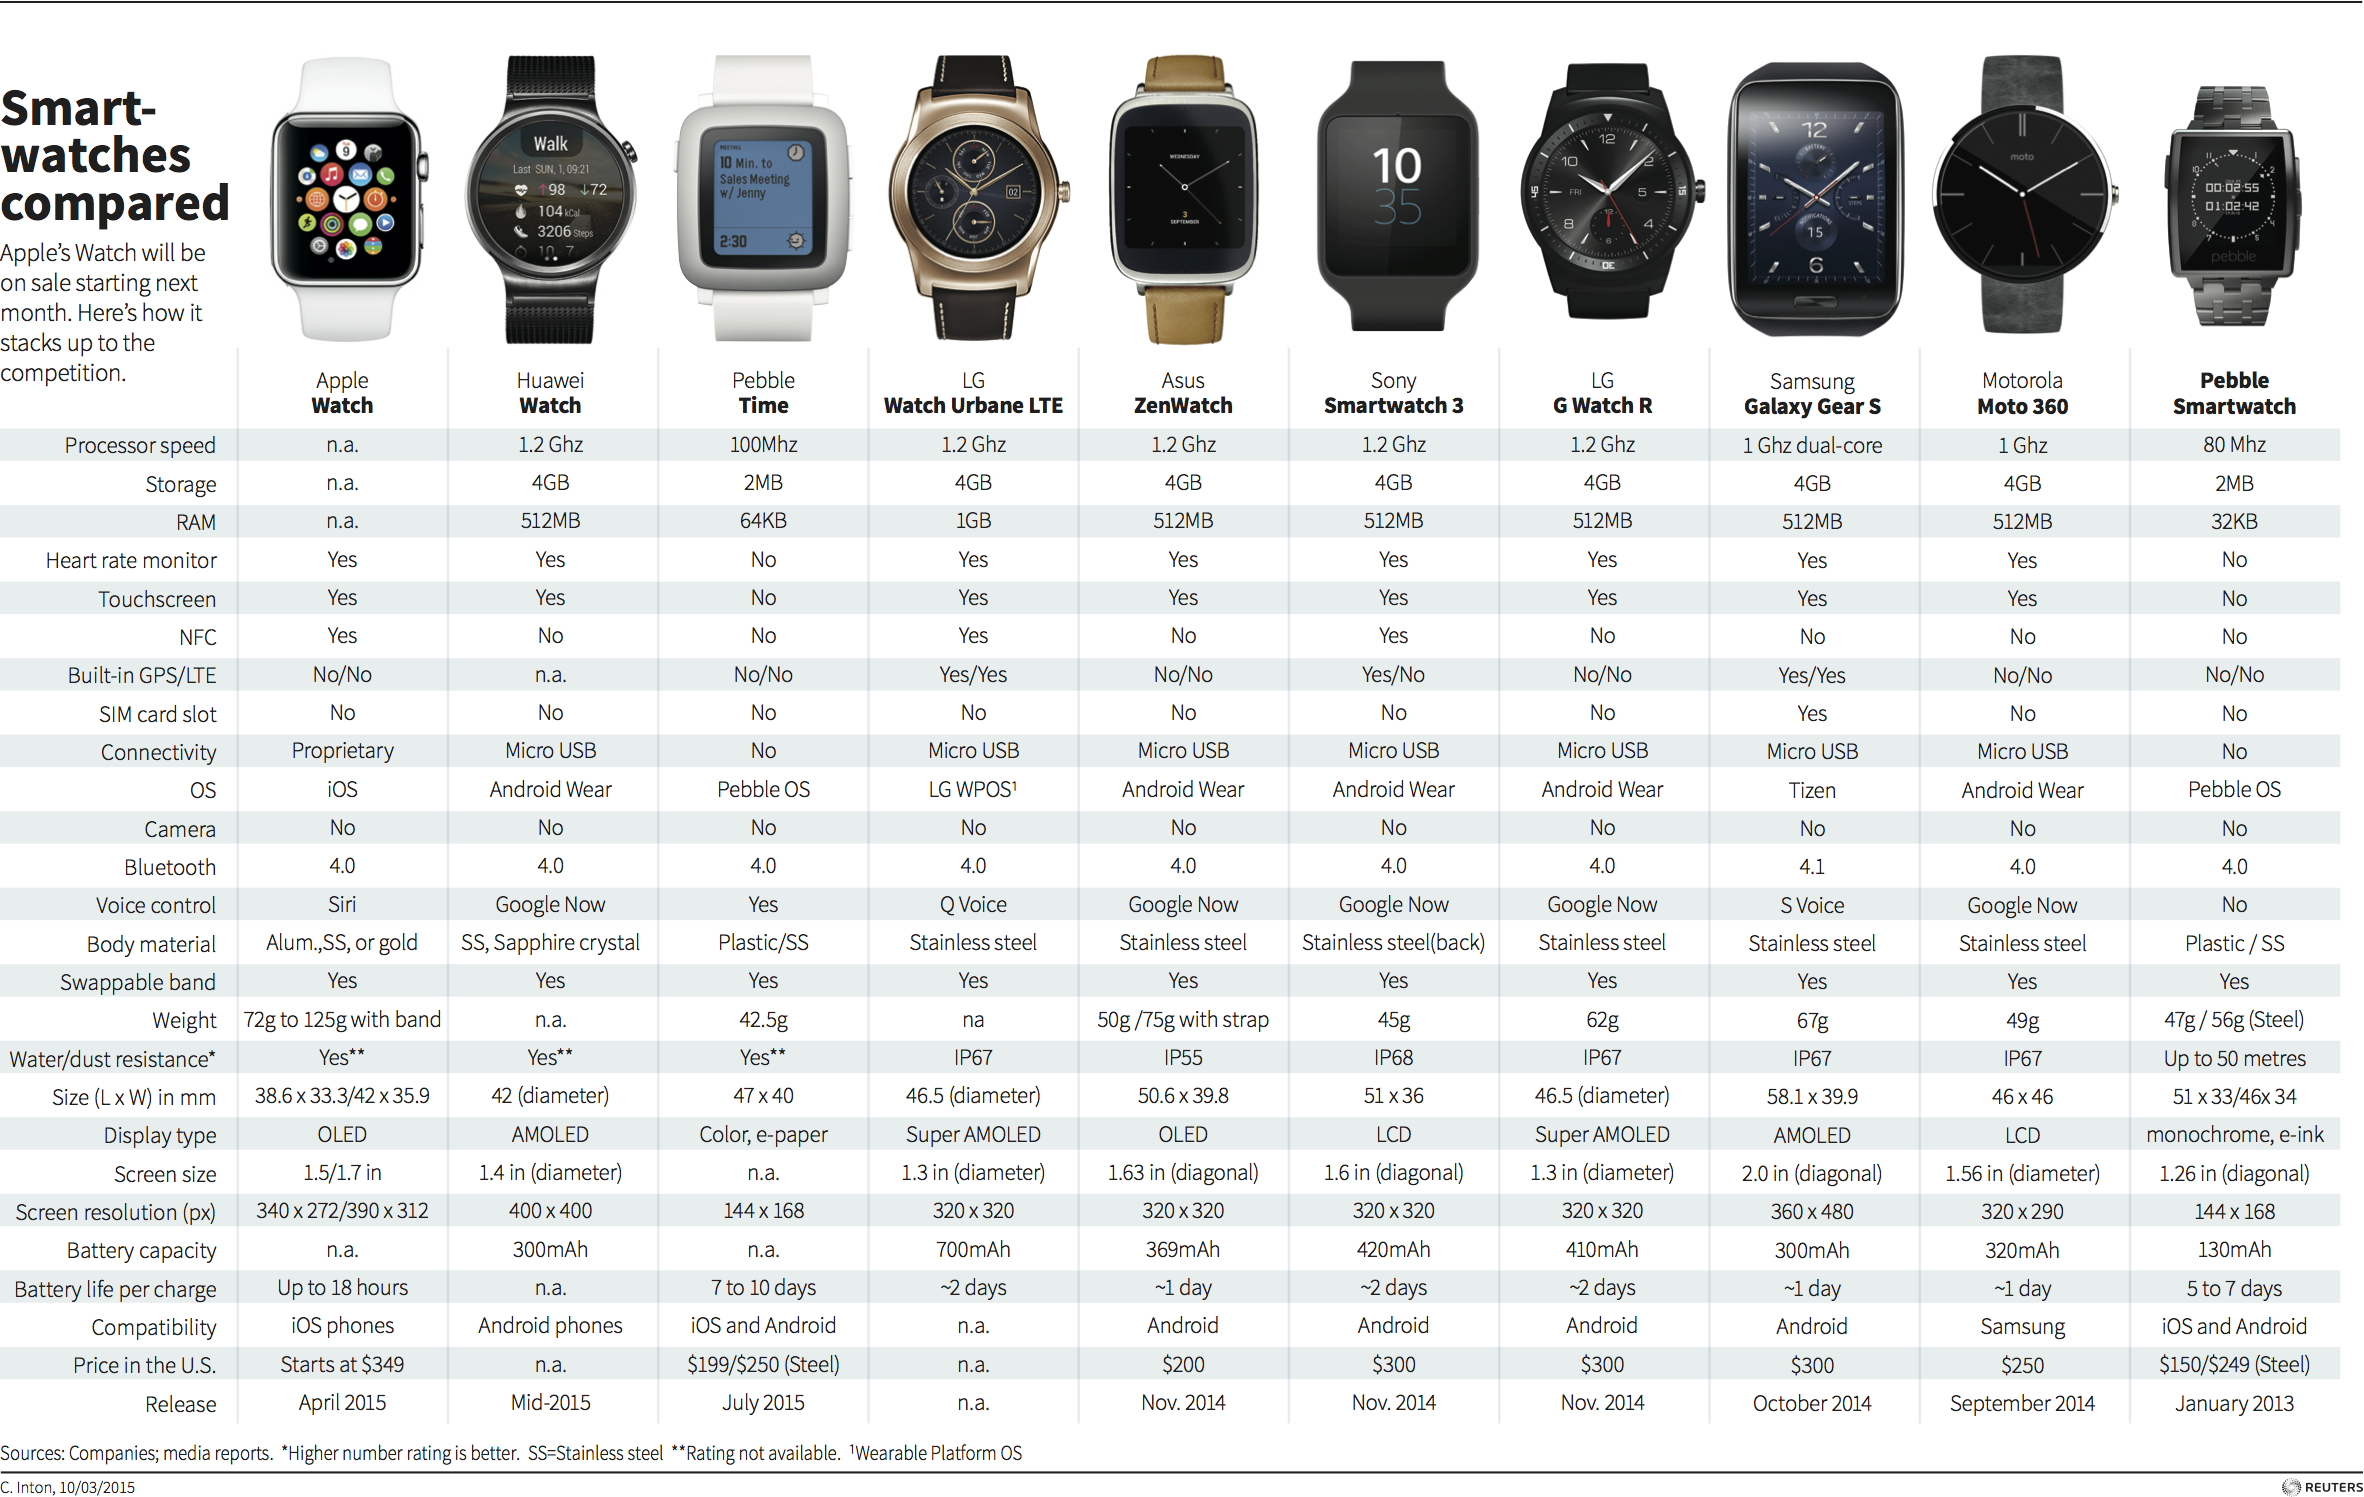 Smartwatches compared – Should Apple's 